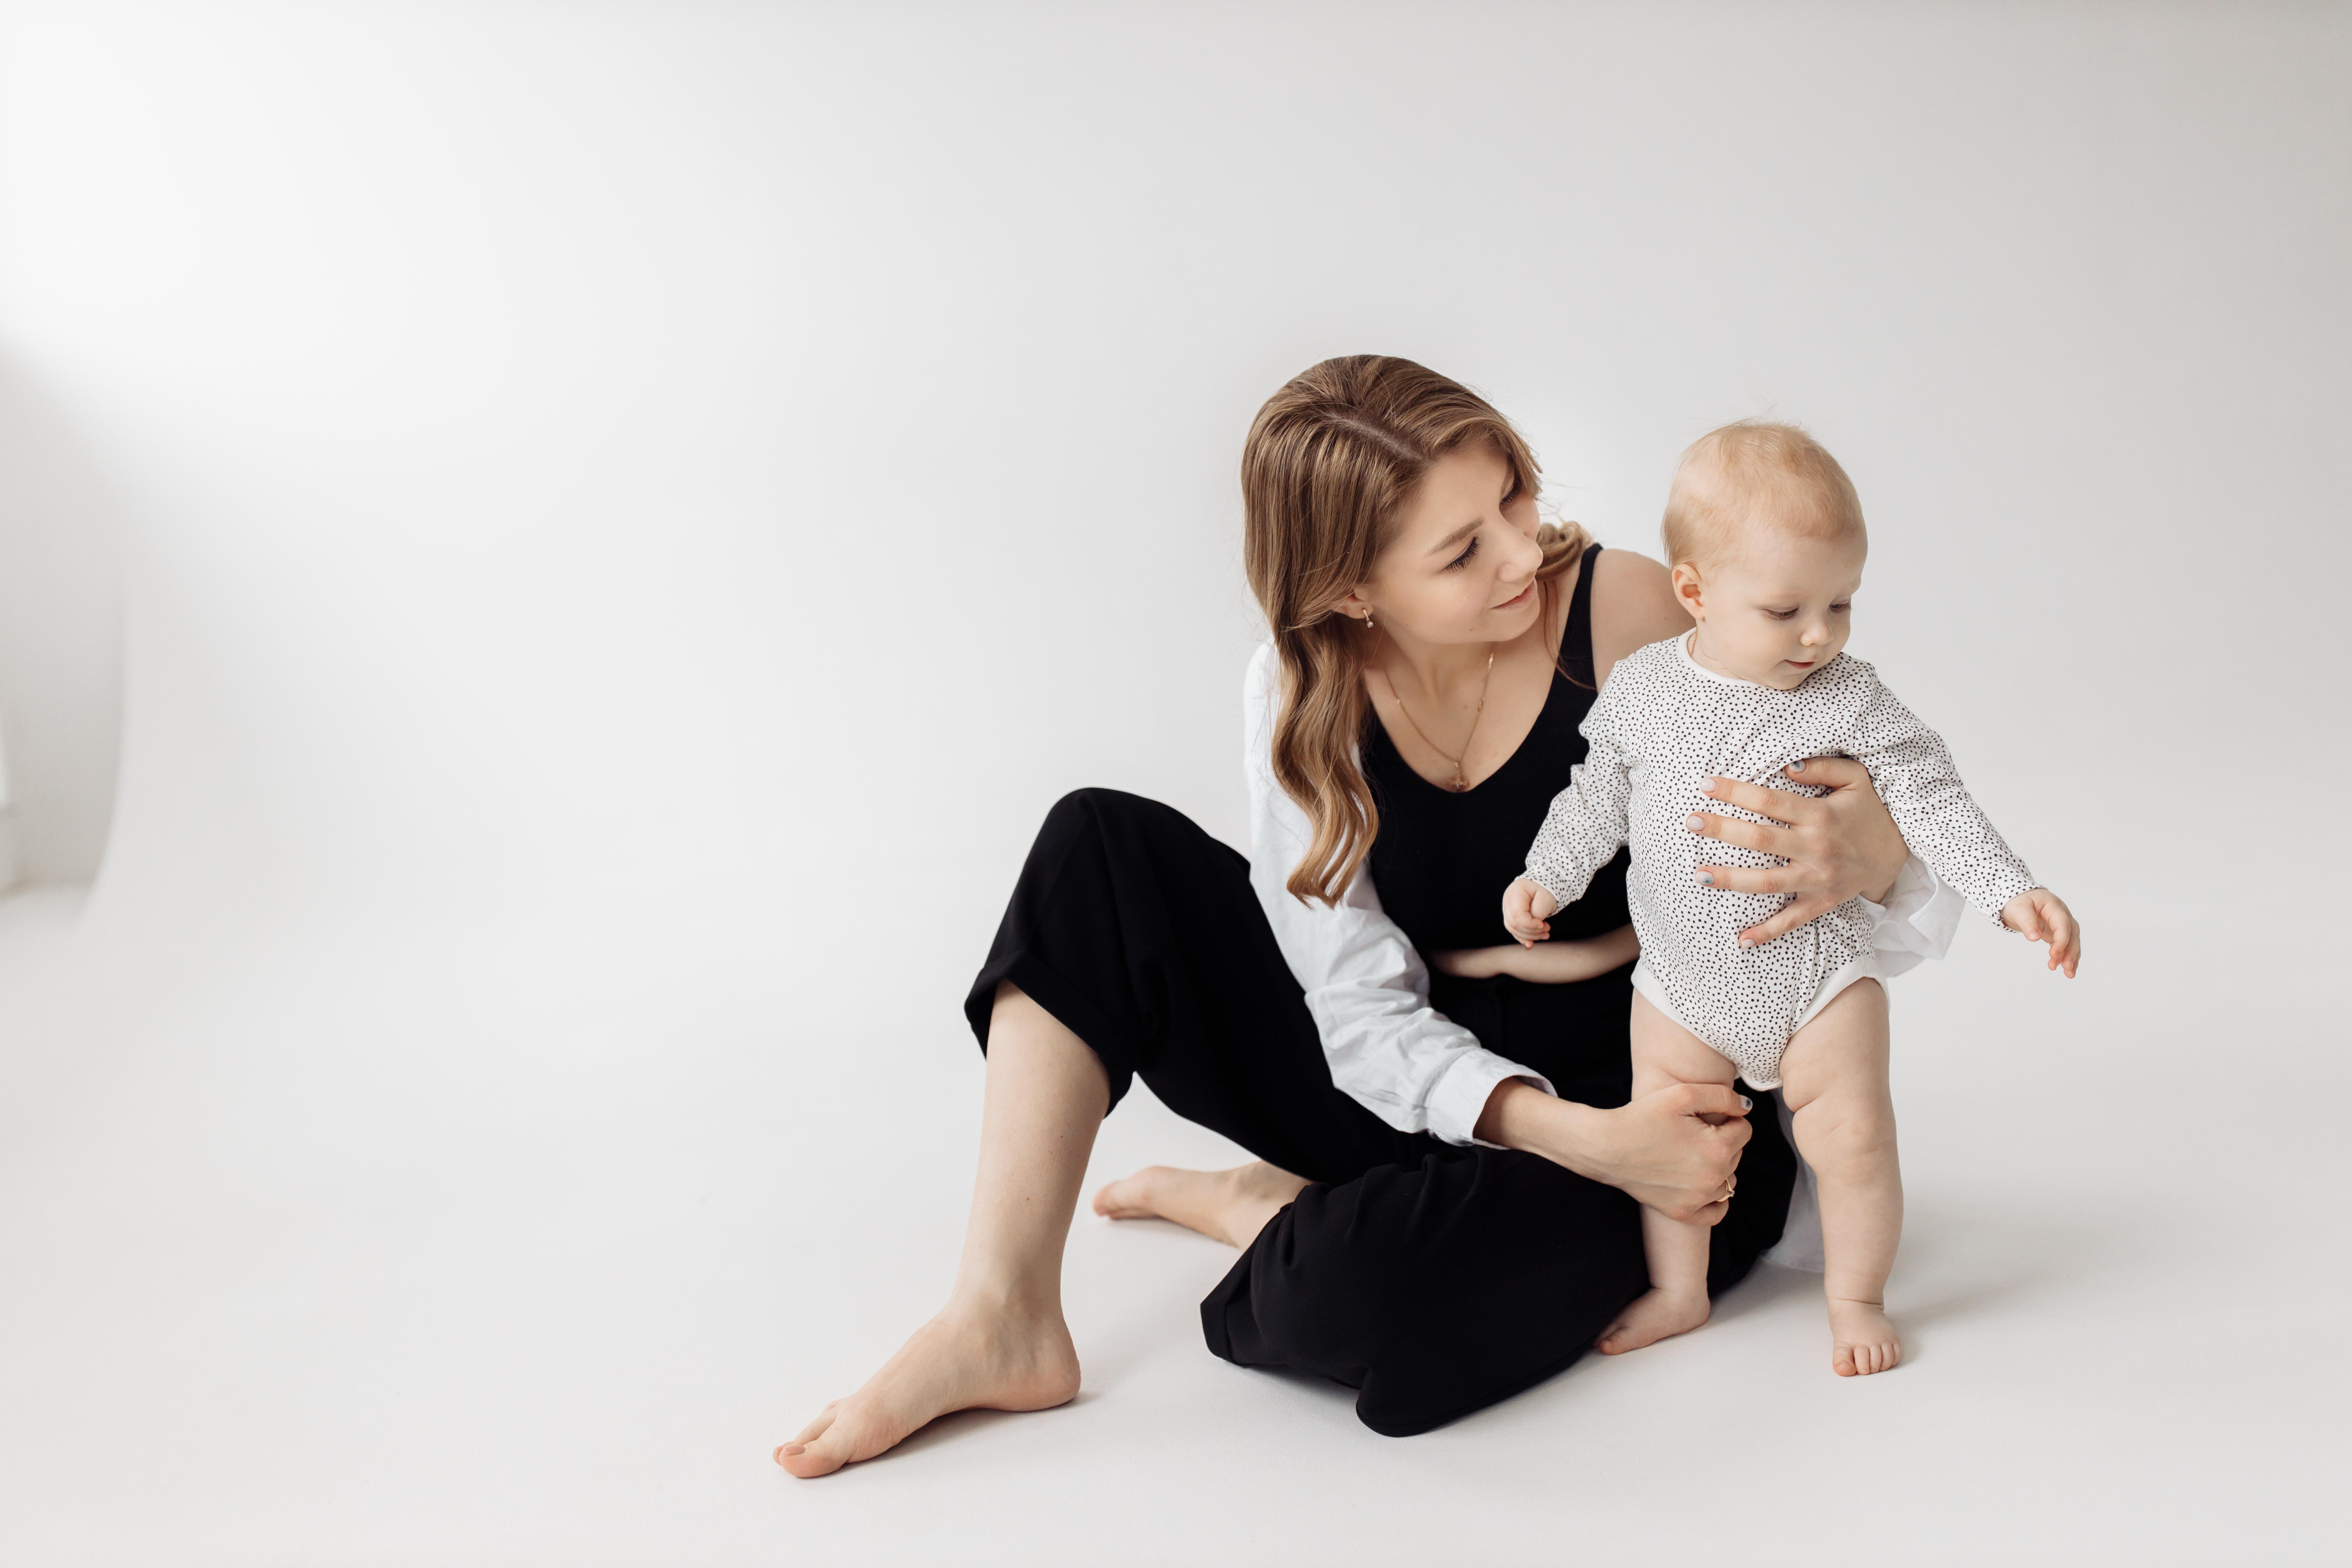 A new mom and her baby pose for an adorable Mother’s Day photoshoot.